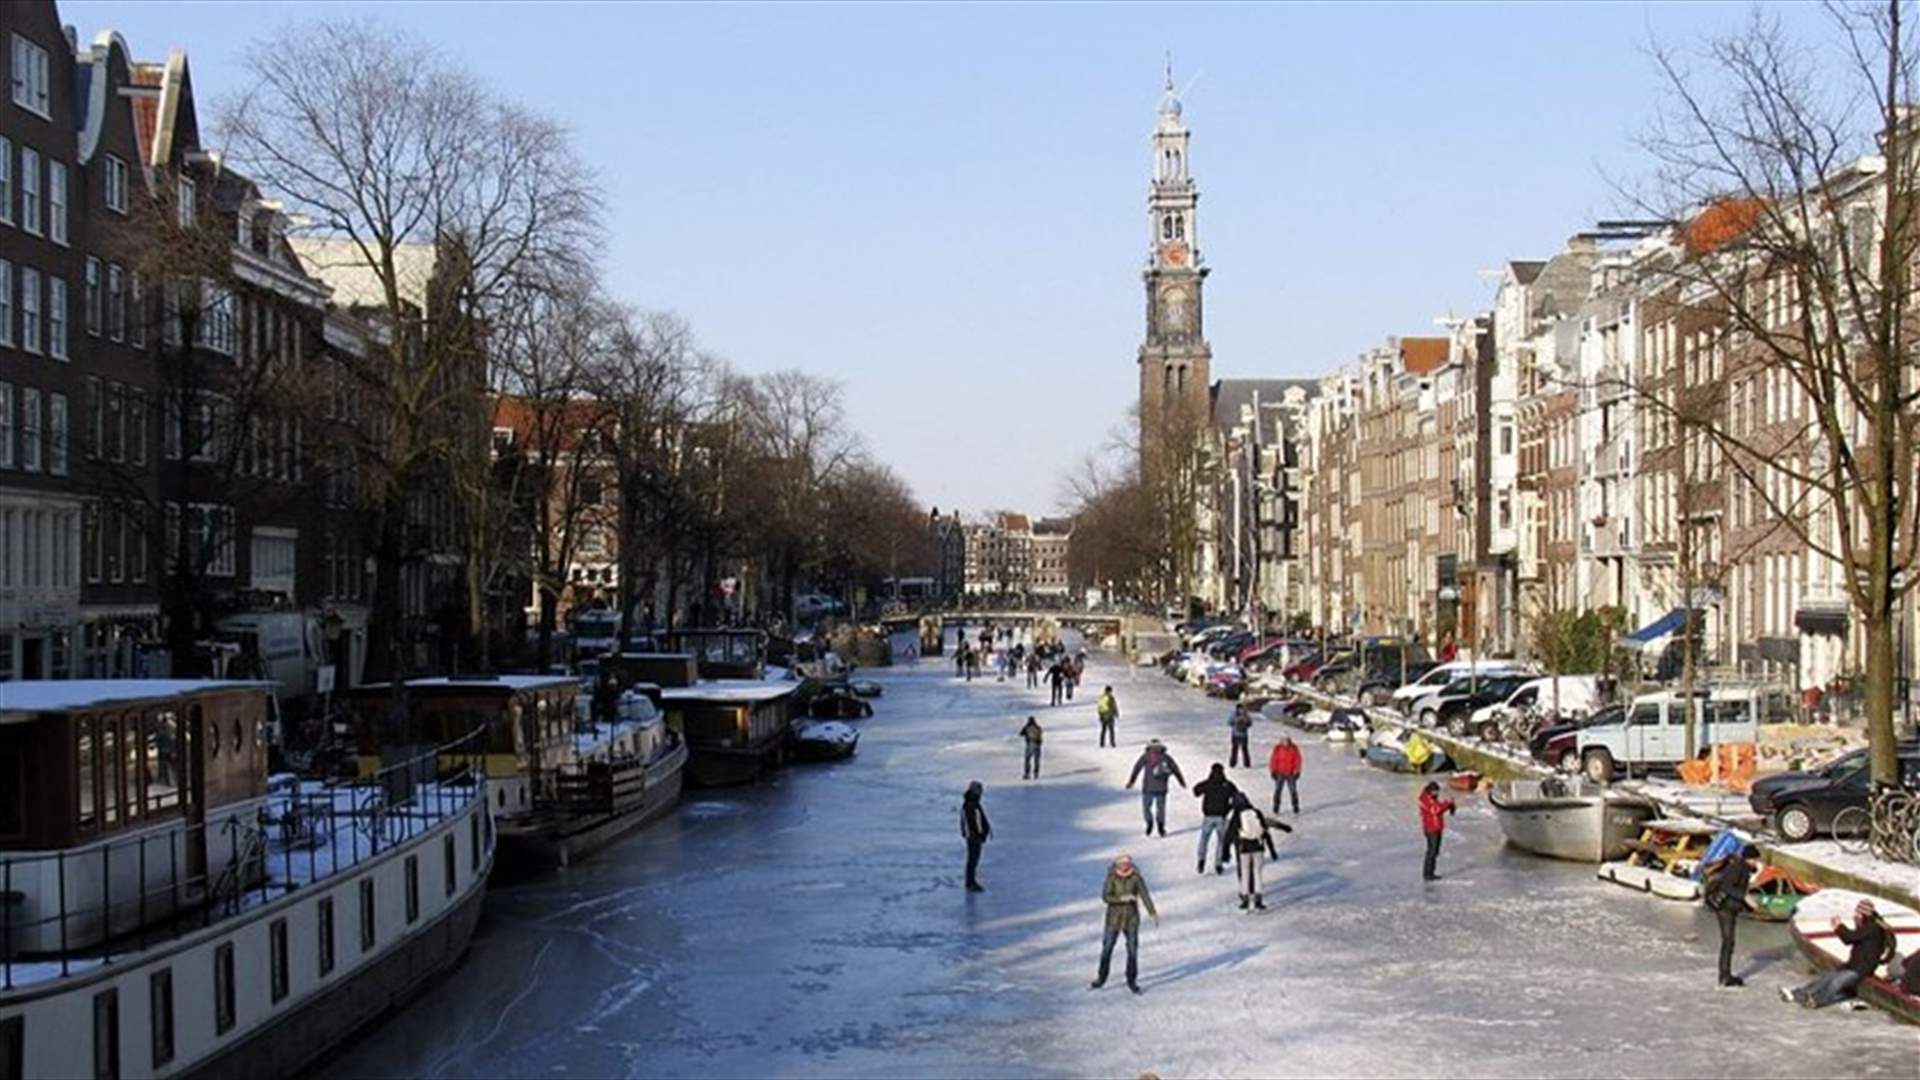 VIDEO - Ice Skaters Glide Over Frozen Canal In Amsterdam During Icy Weather